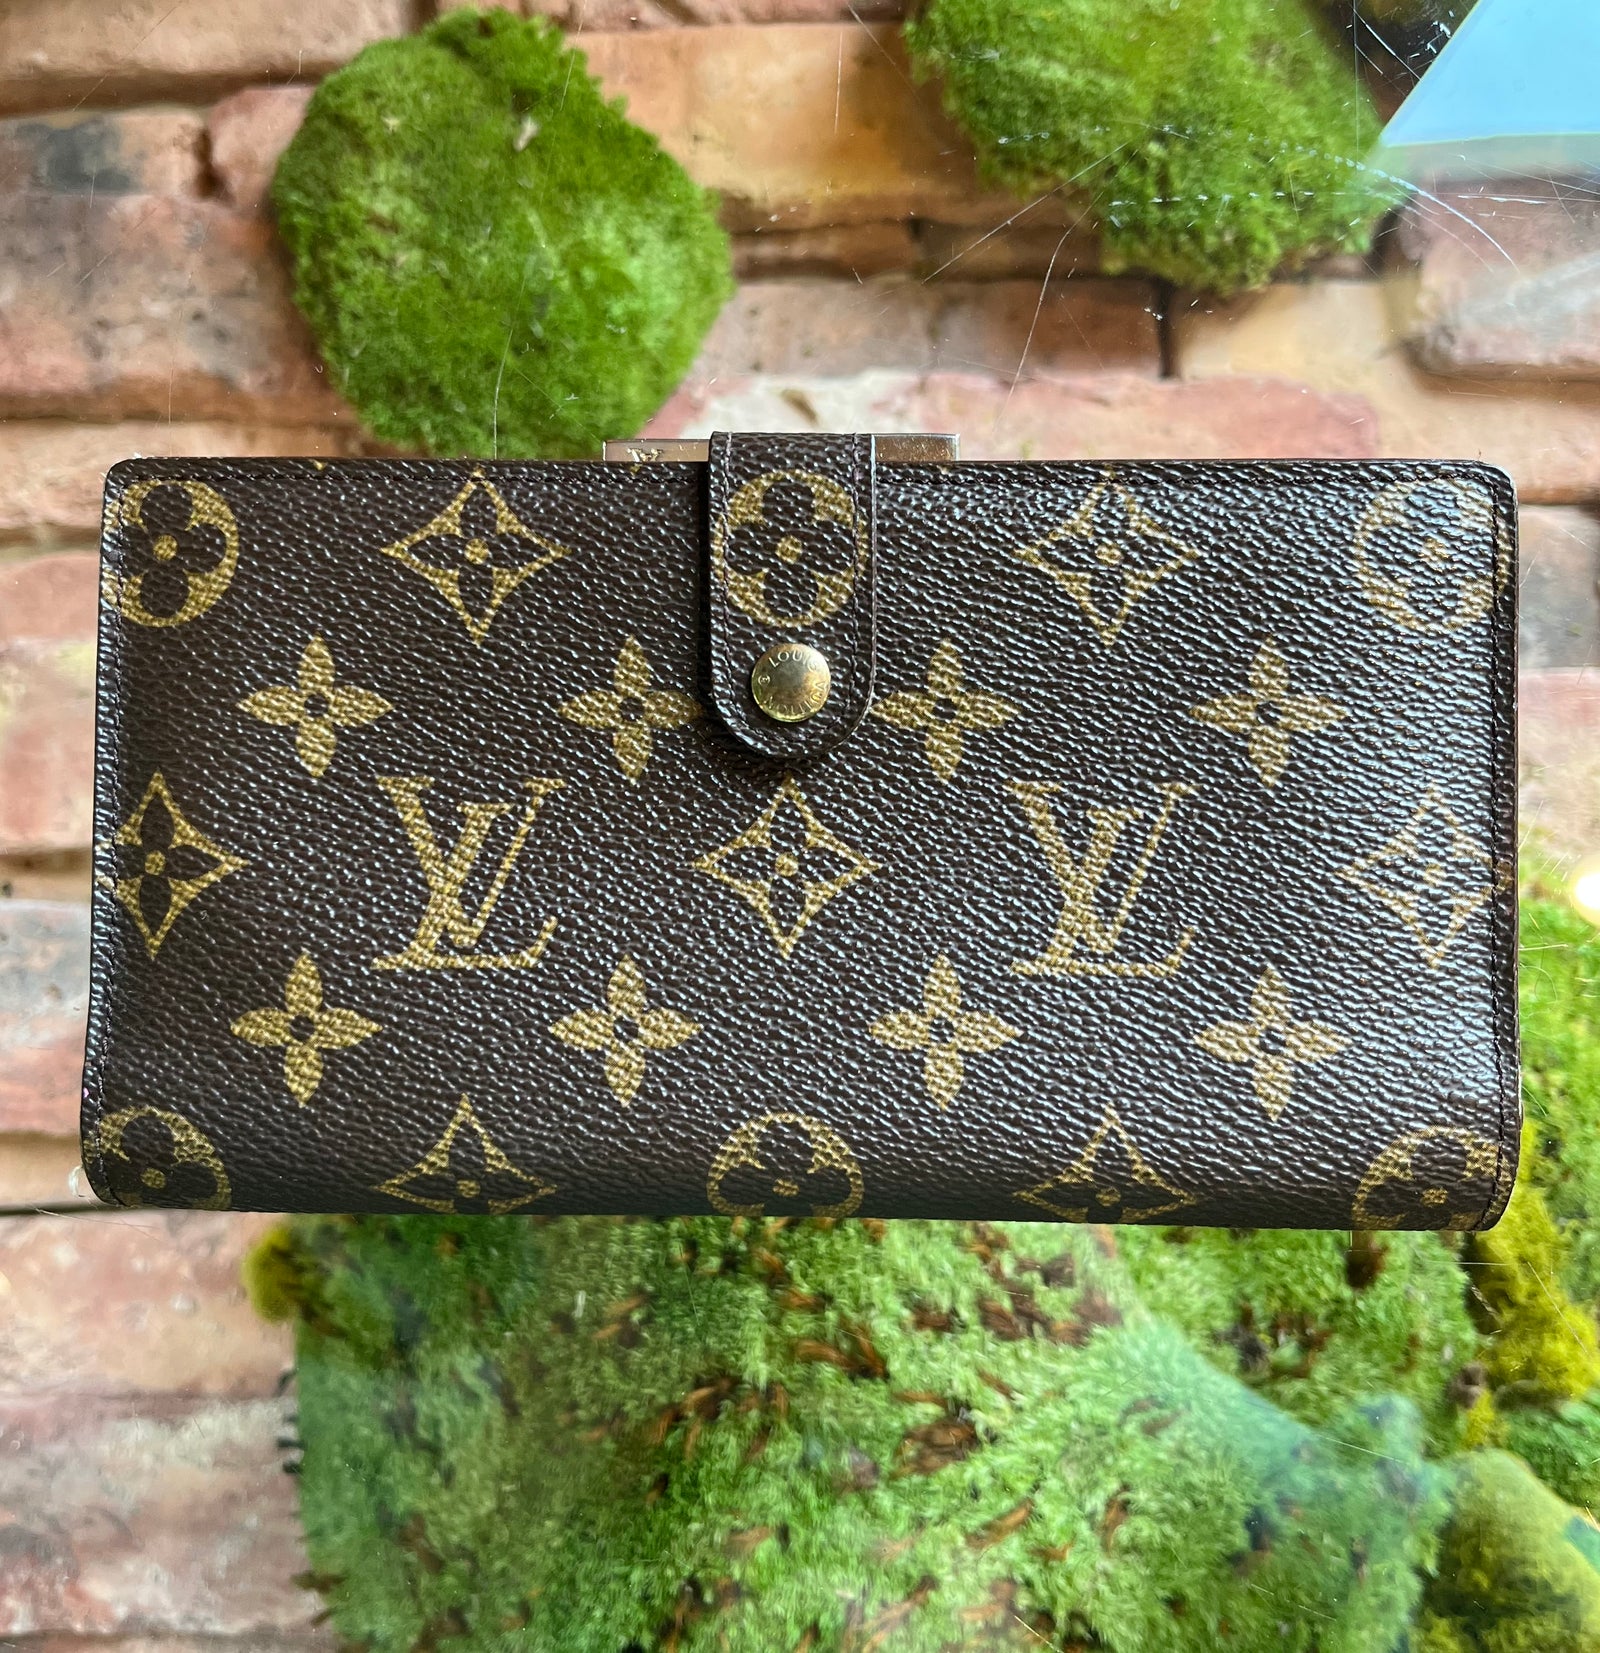 Authentic Louis Vuitton Bags, Shoes, and Accessories - The Purse